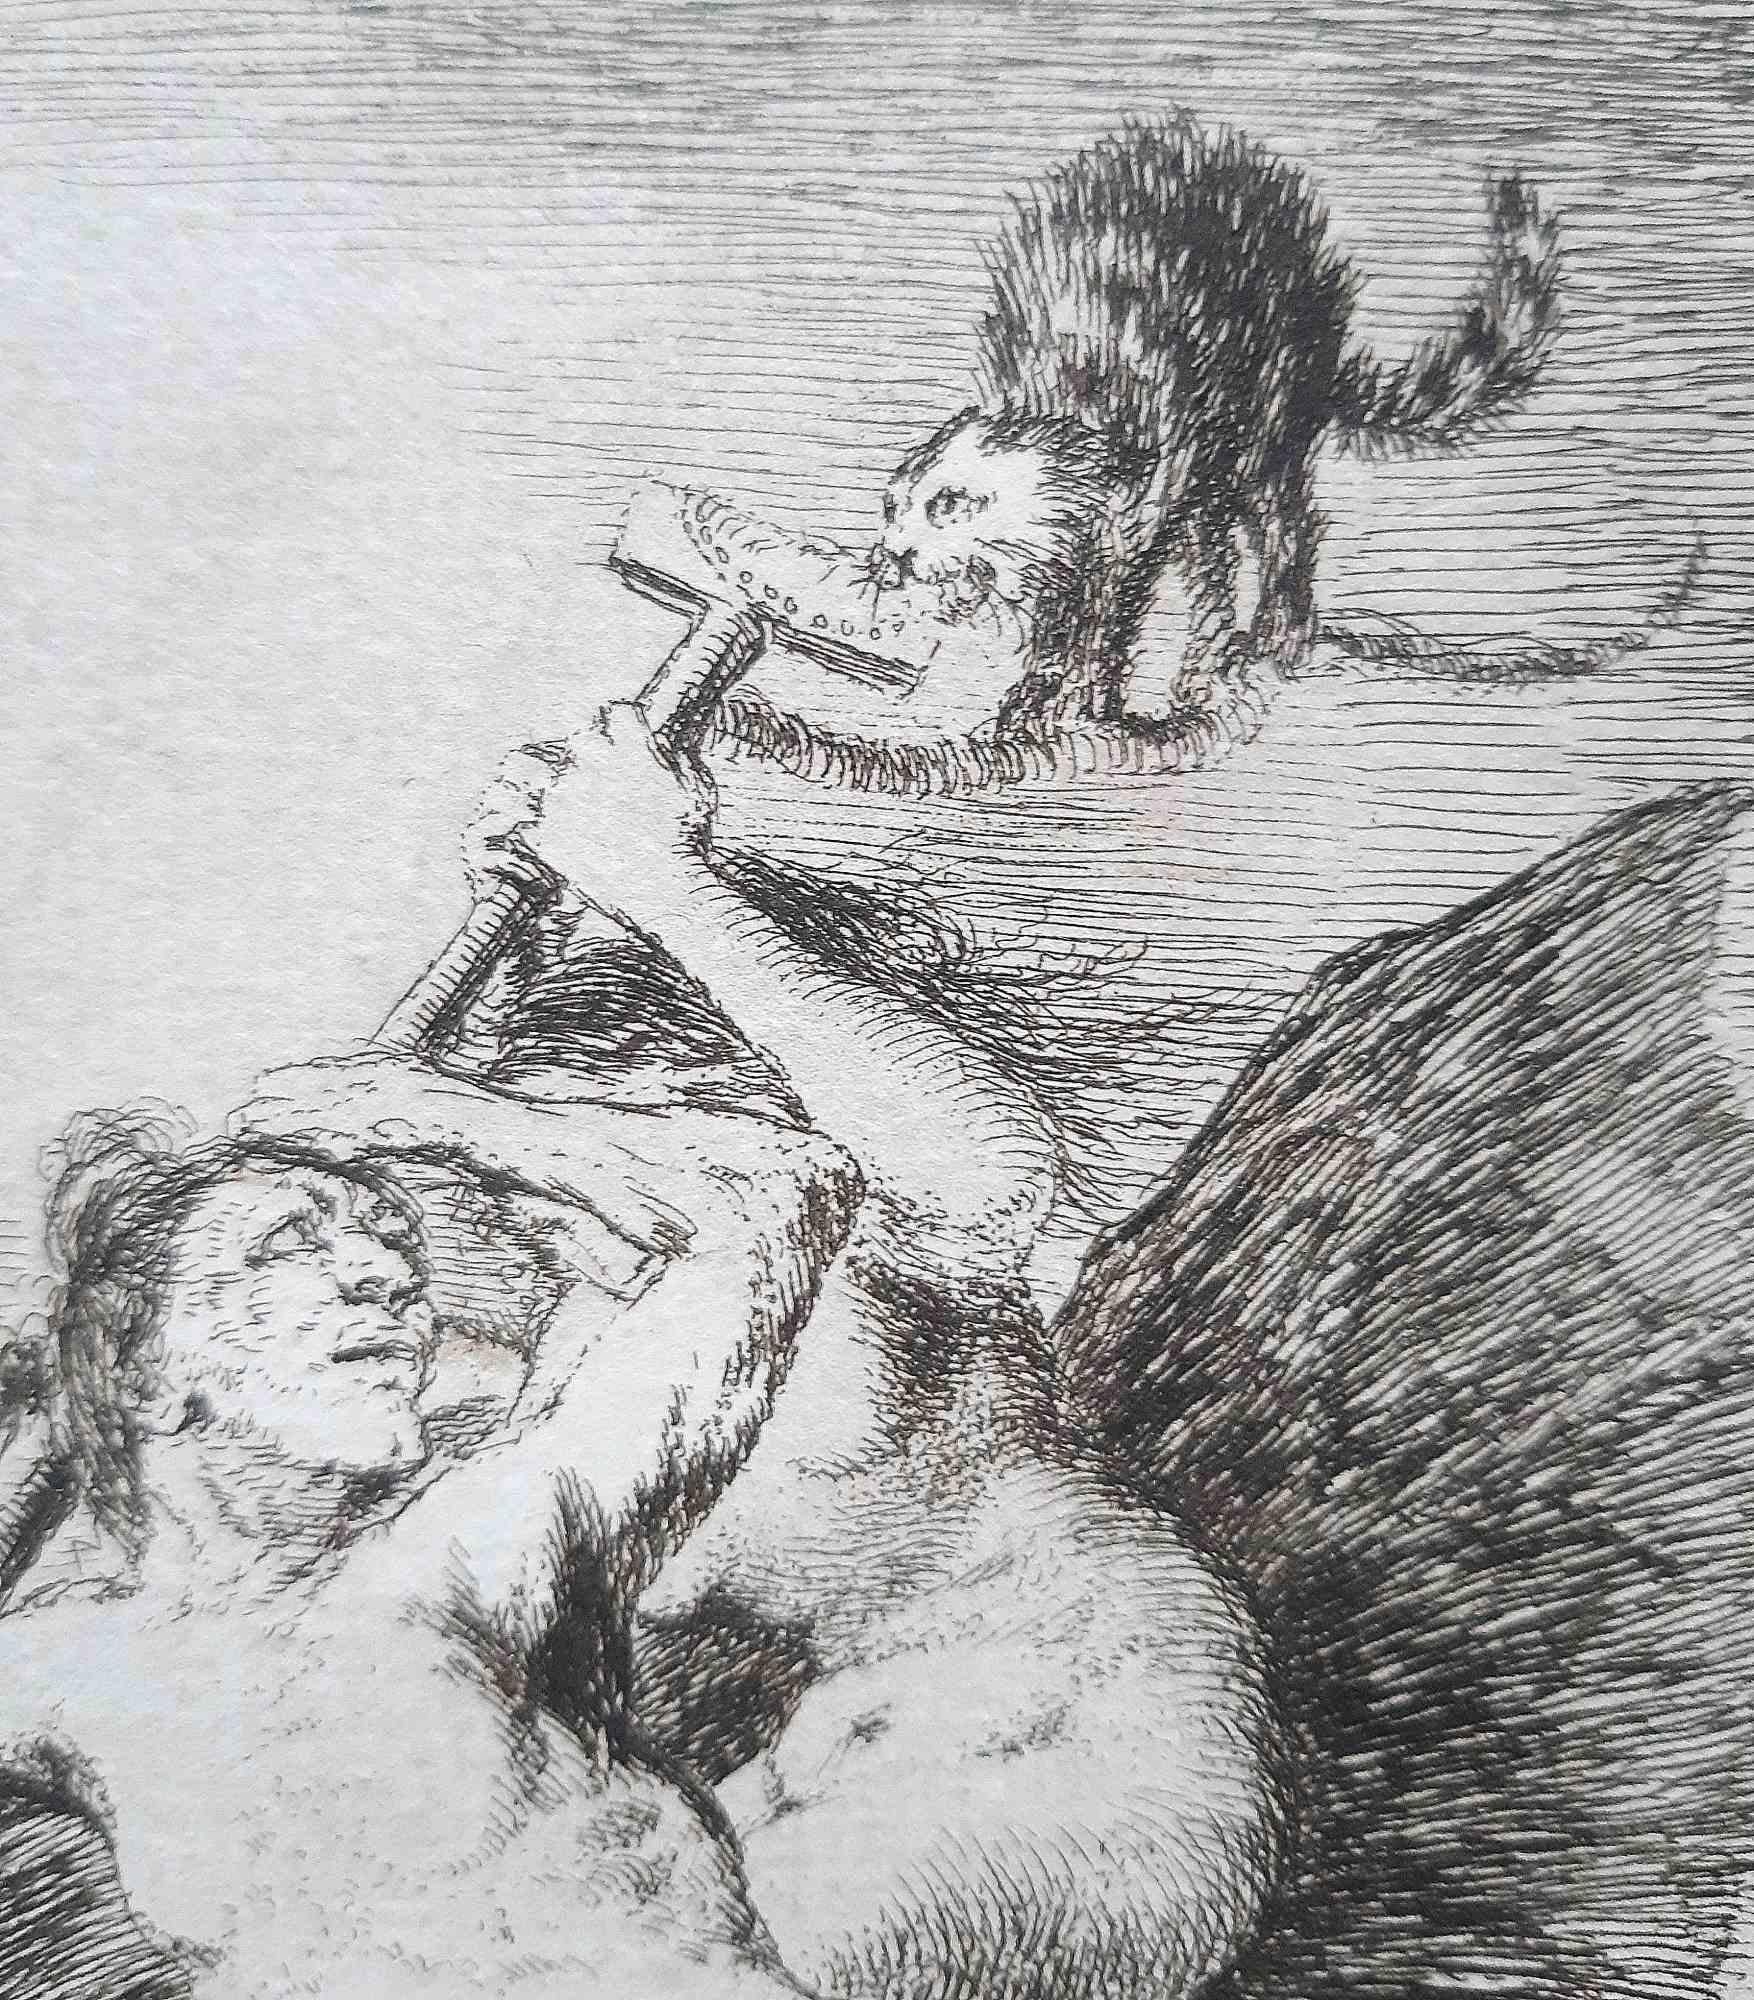 Allà Và Eso from Los Caprichos  is an original artwork realized by the artist Francisco Goya and published for the first time in 1799.

Etching and aquatint on paper.

The etching is part of the First Edition of 